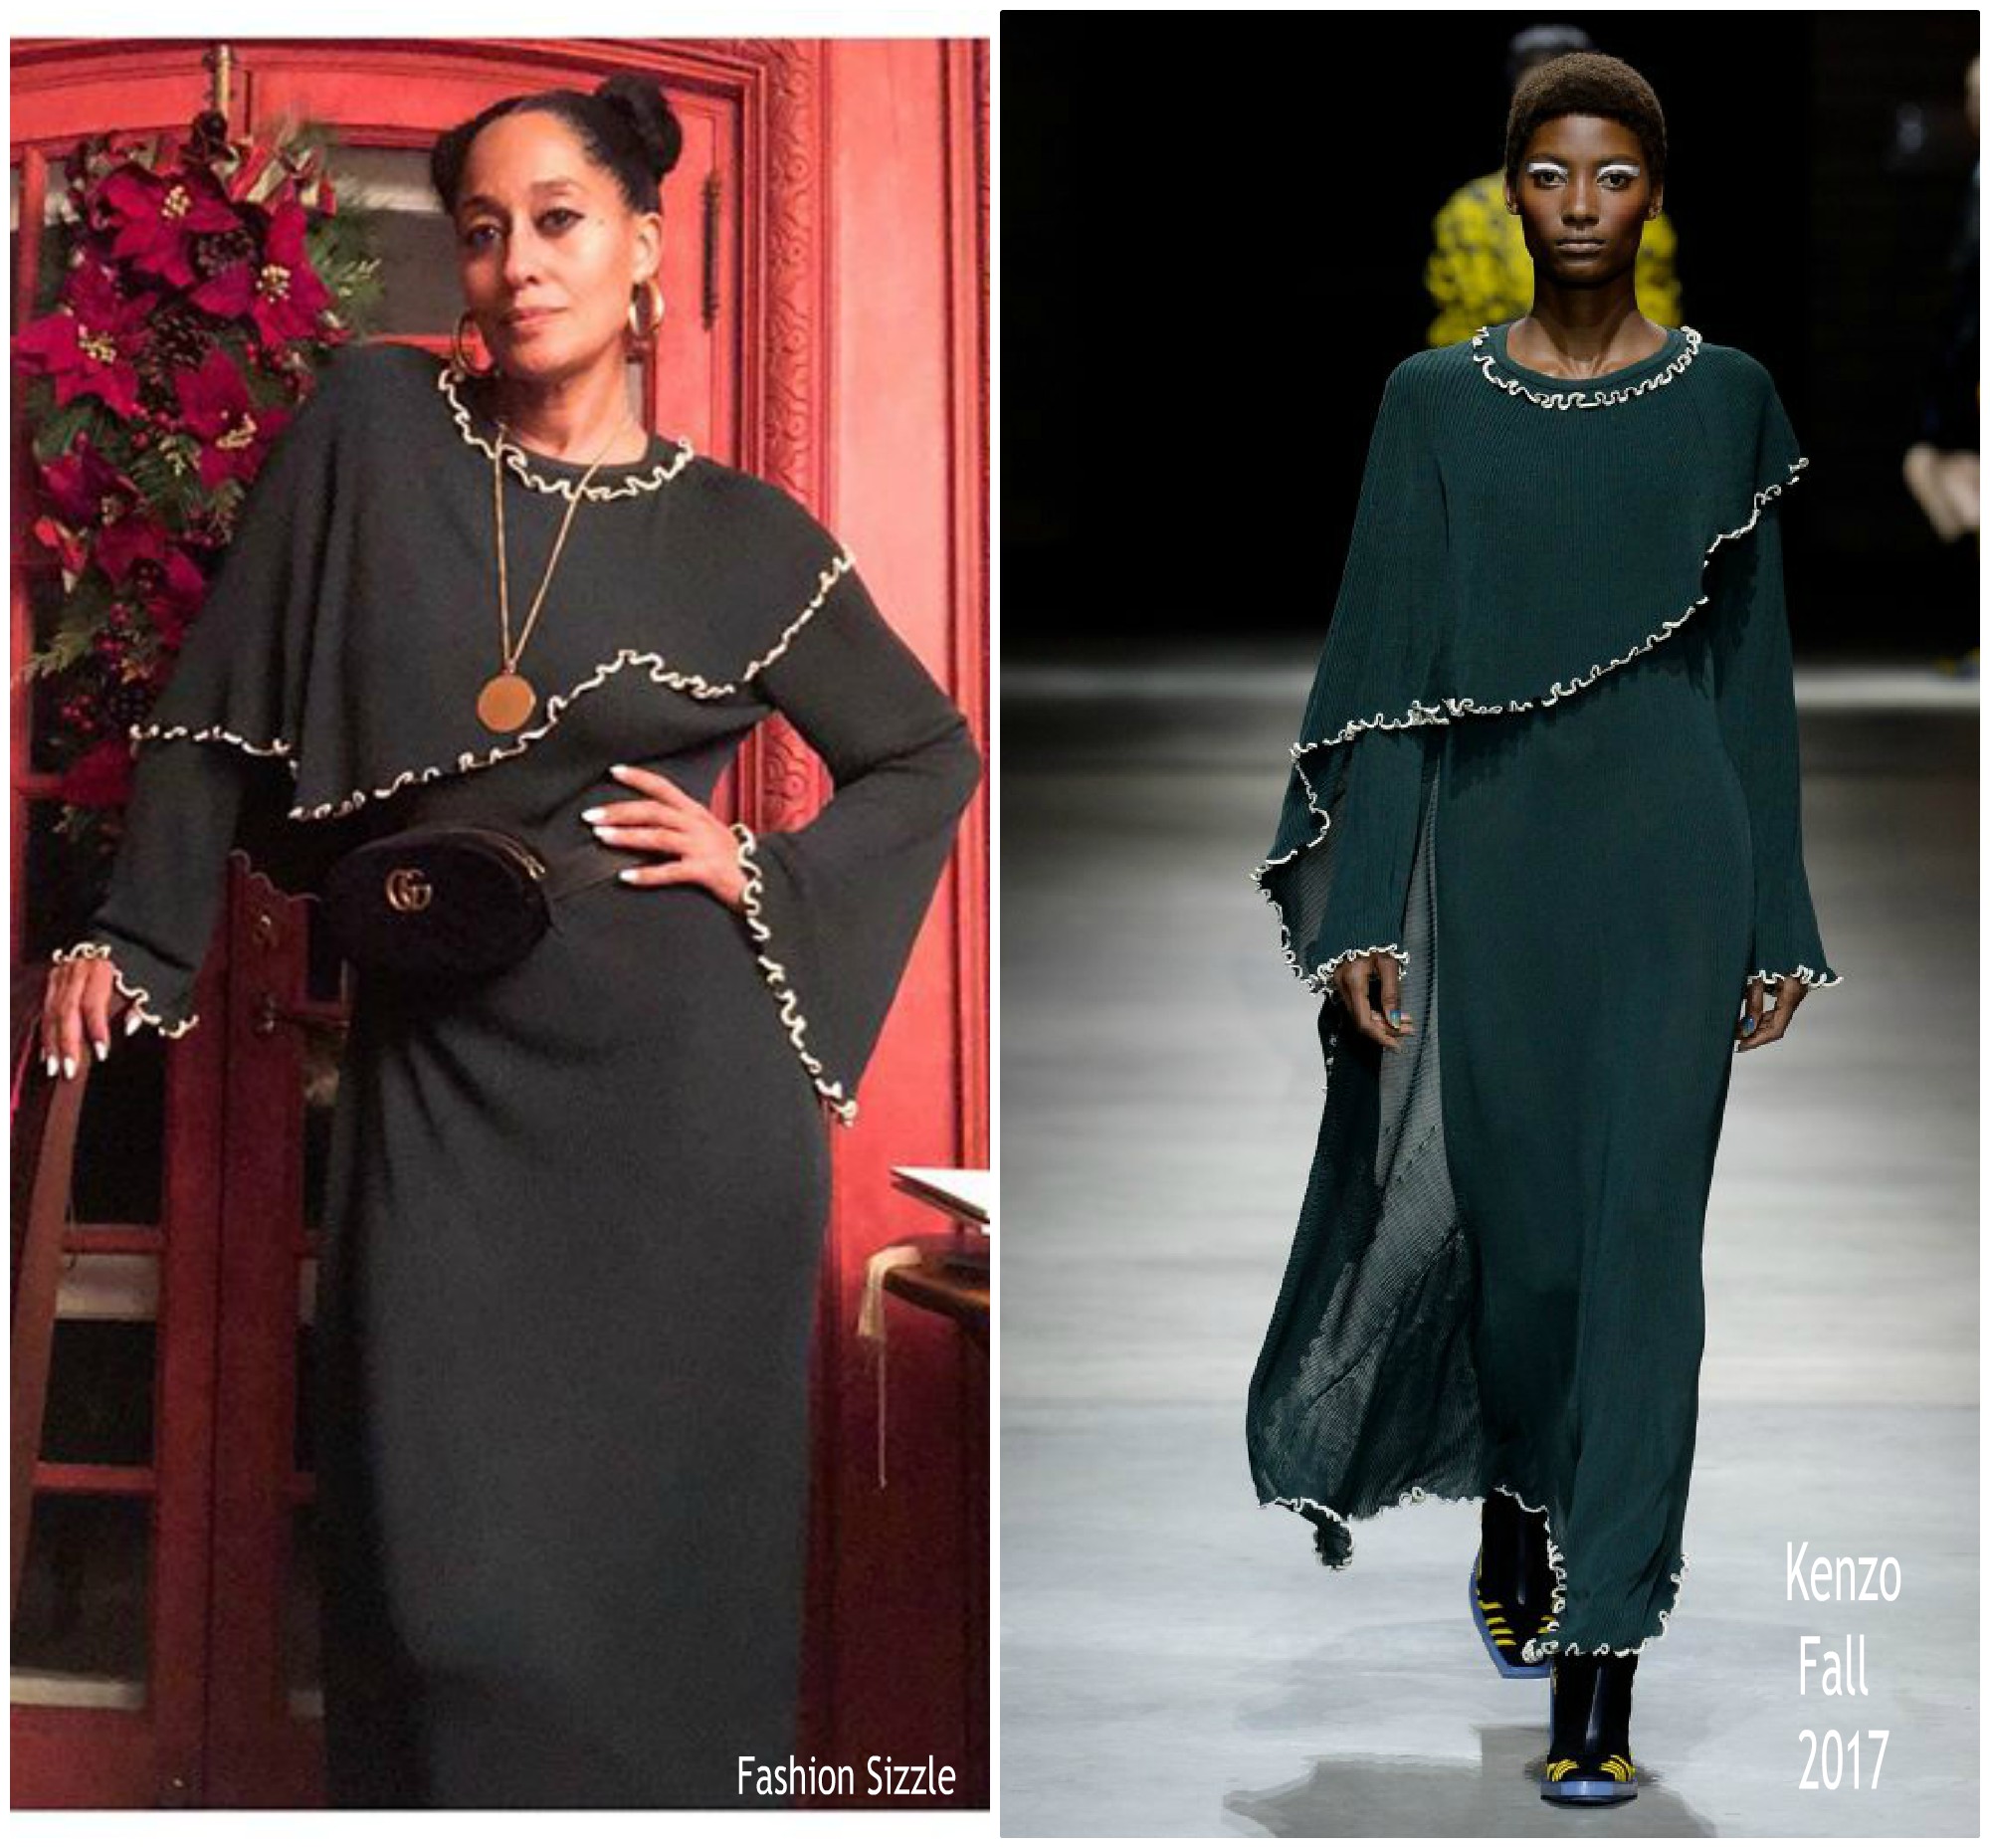 tracee-ellis-ross-in-kenzo-gucci-instagram-pic